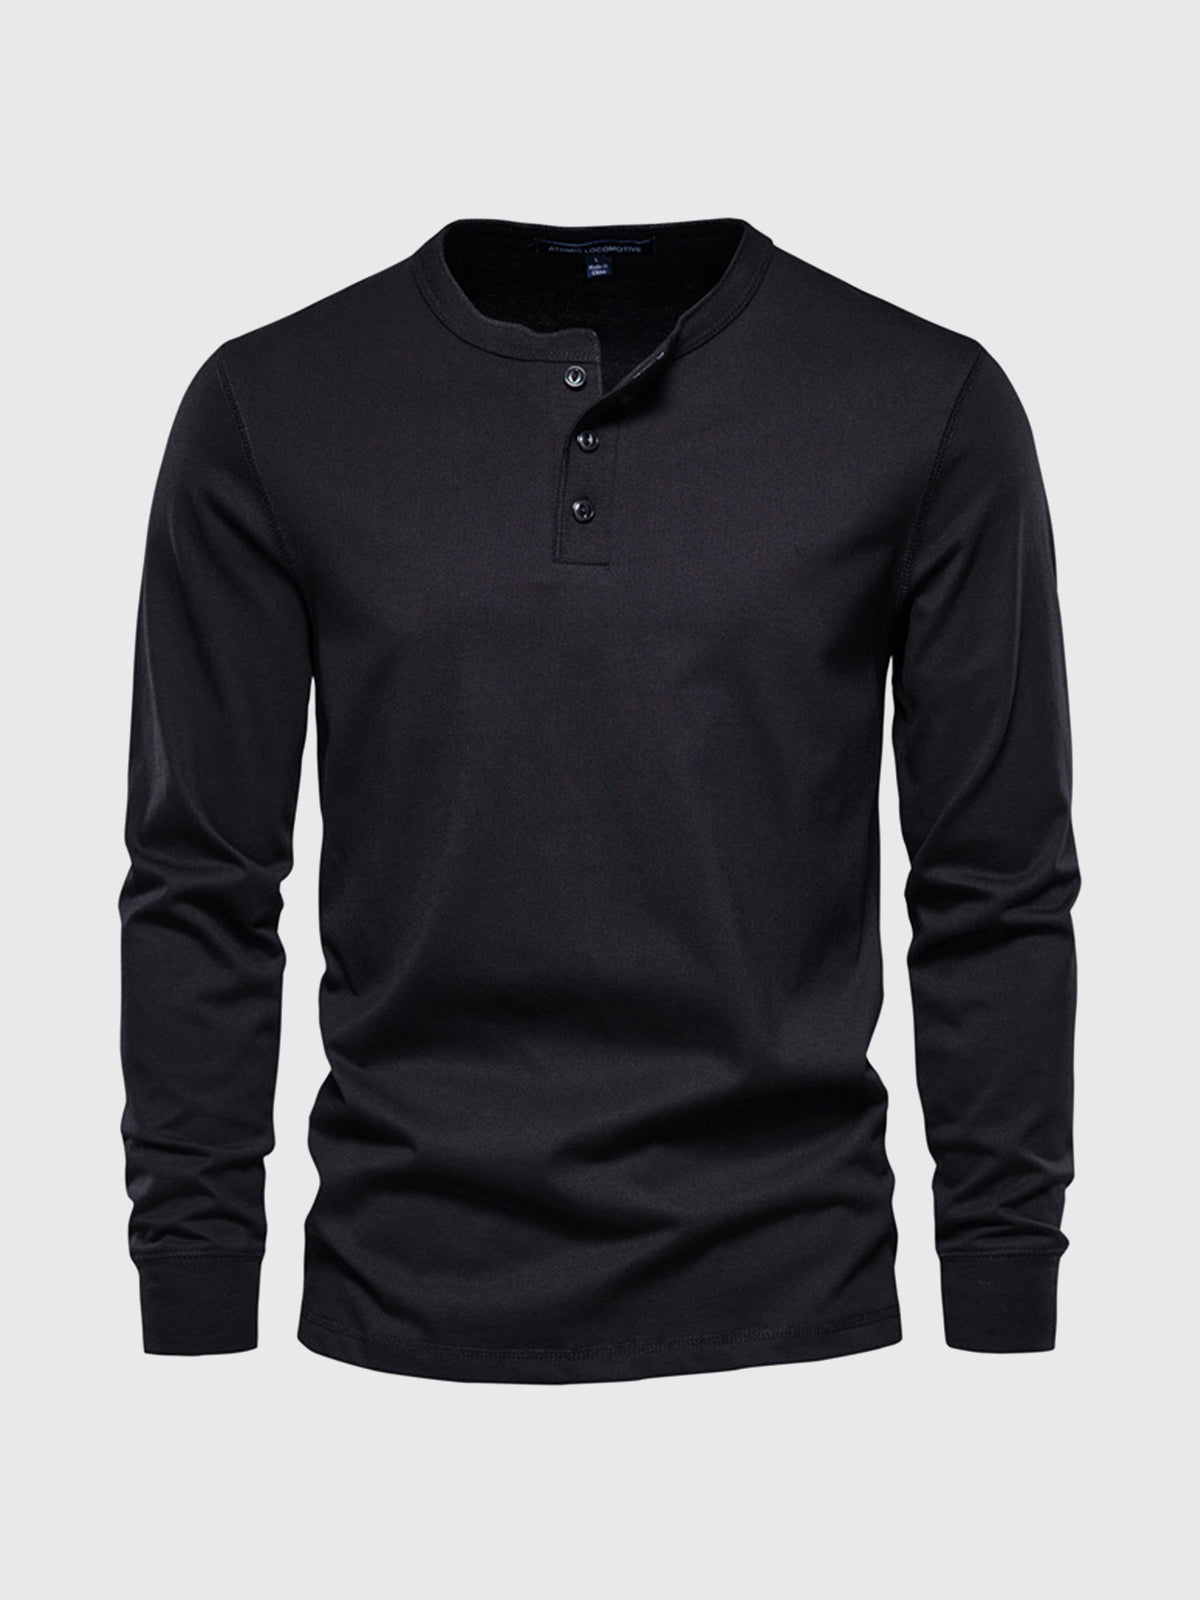 M's Classic Cotton long Sleeve Henley Shirt | Ahaselected